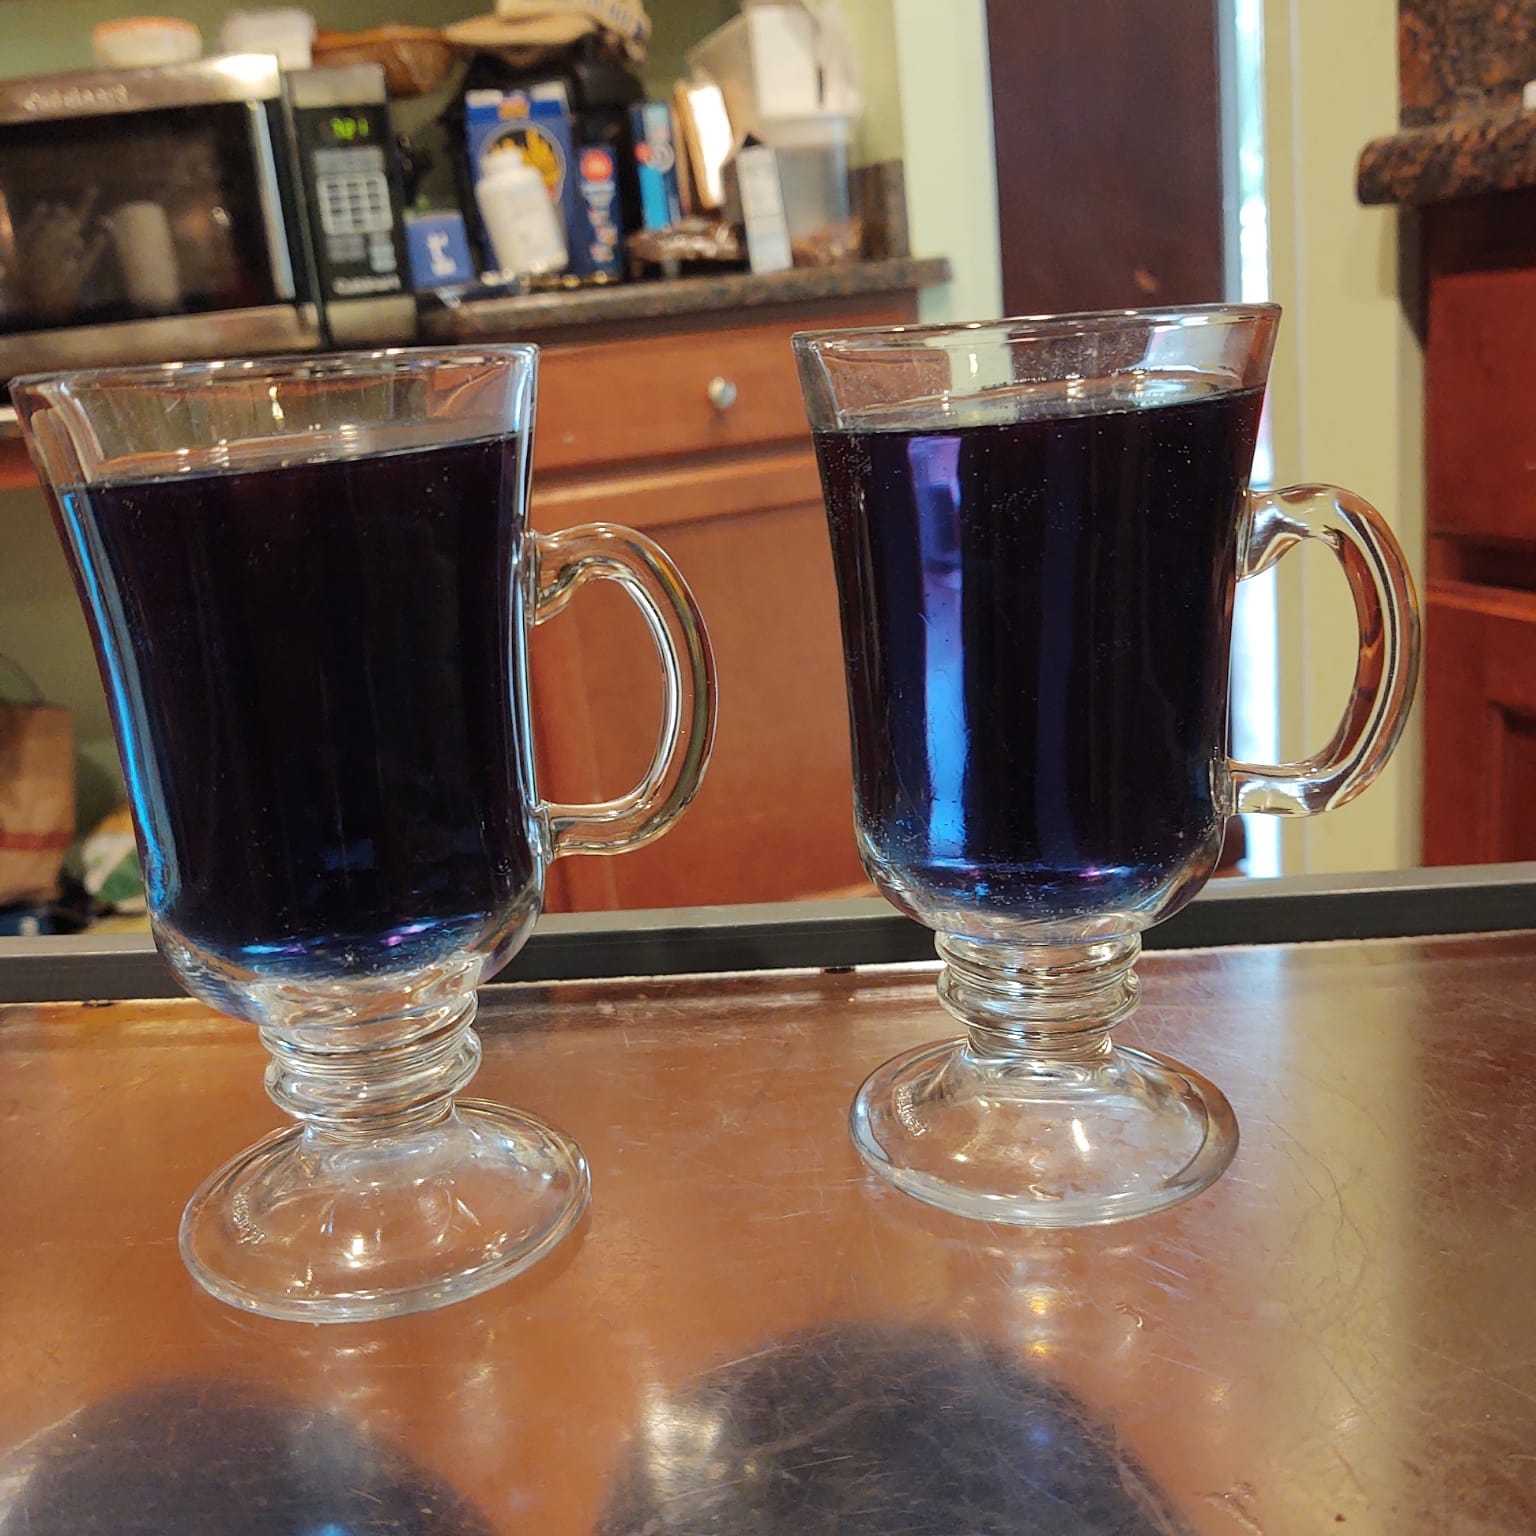 Trying butterfly pea flower tea in our "fancy" latte glasses, gorgeous blue color (turns purple if you add lemon juice), 7-21.